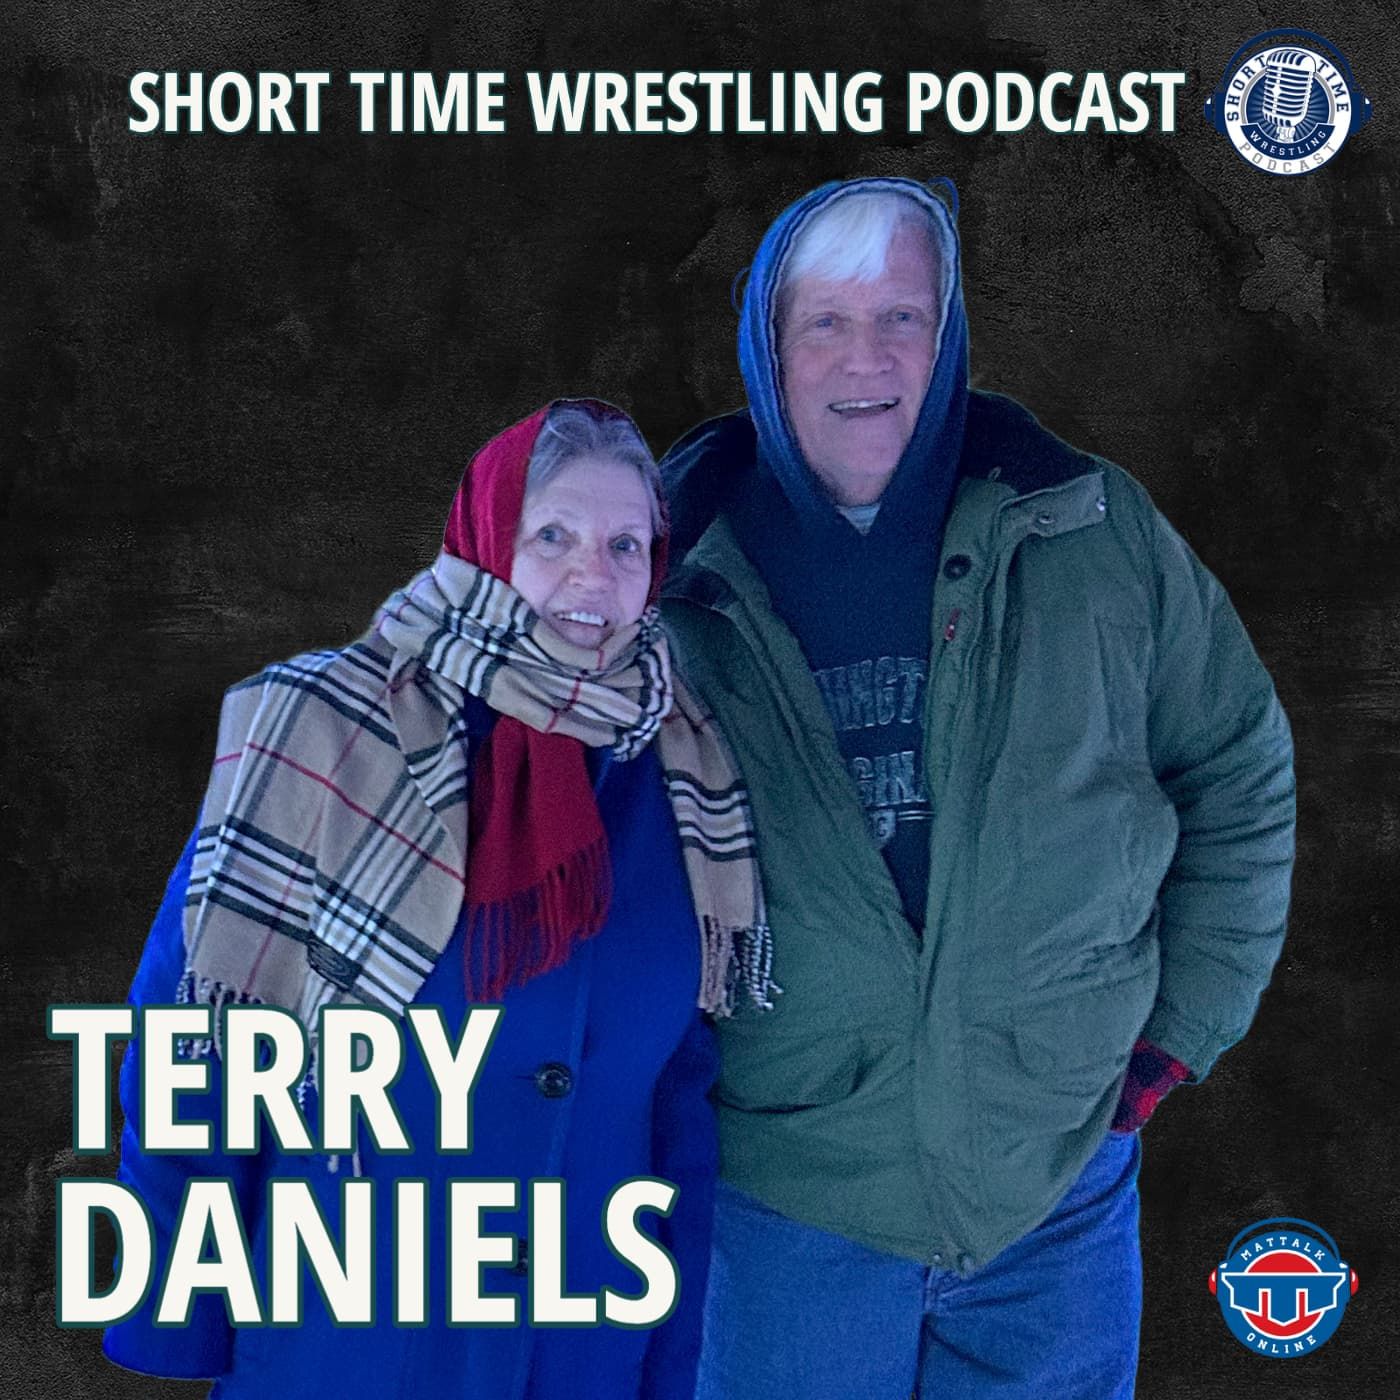 Terry Daniels: It’s all his fault